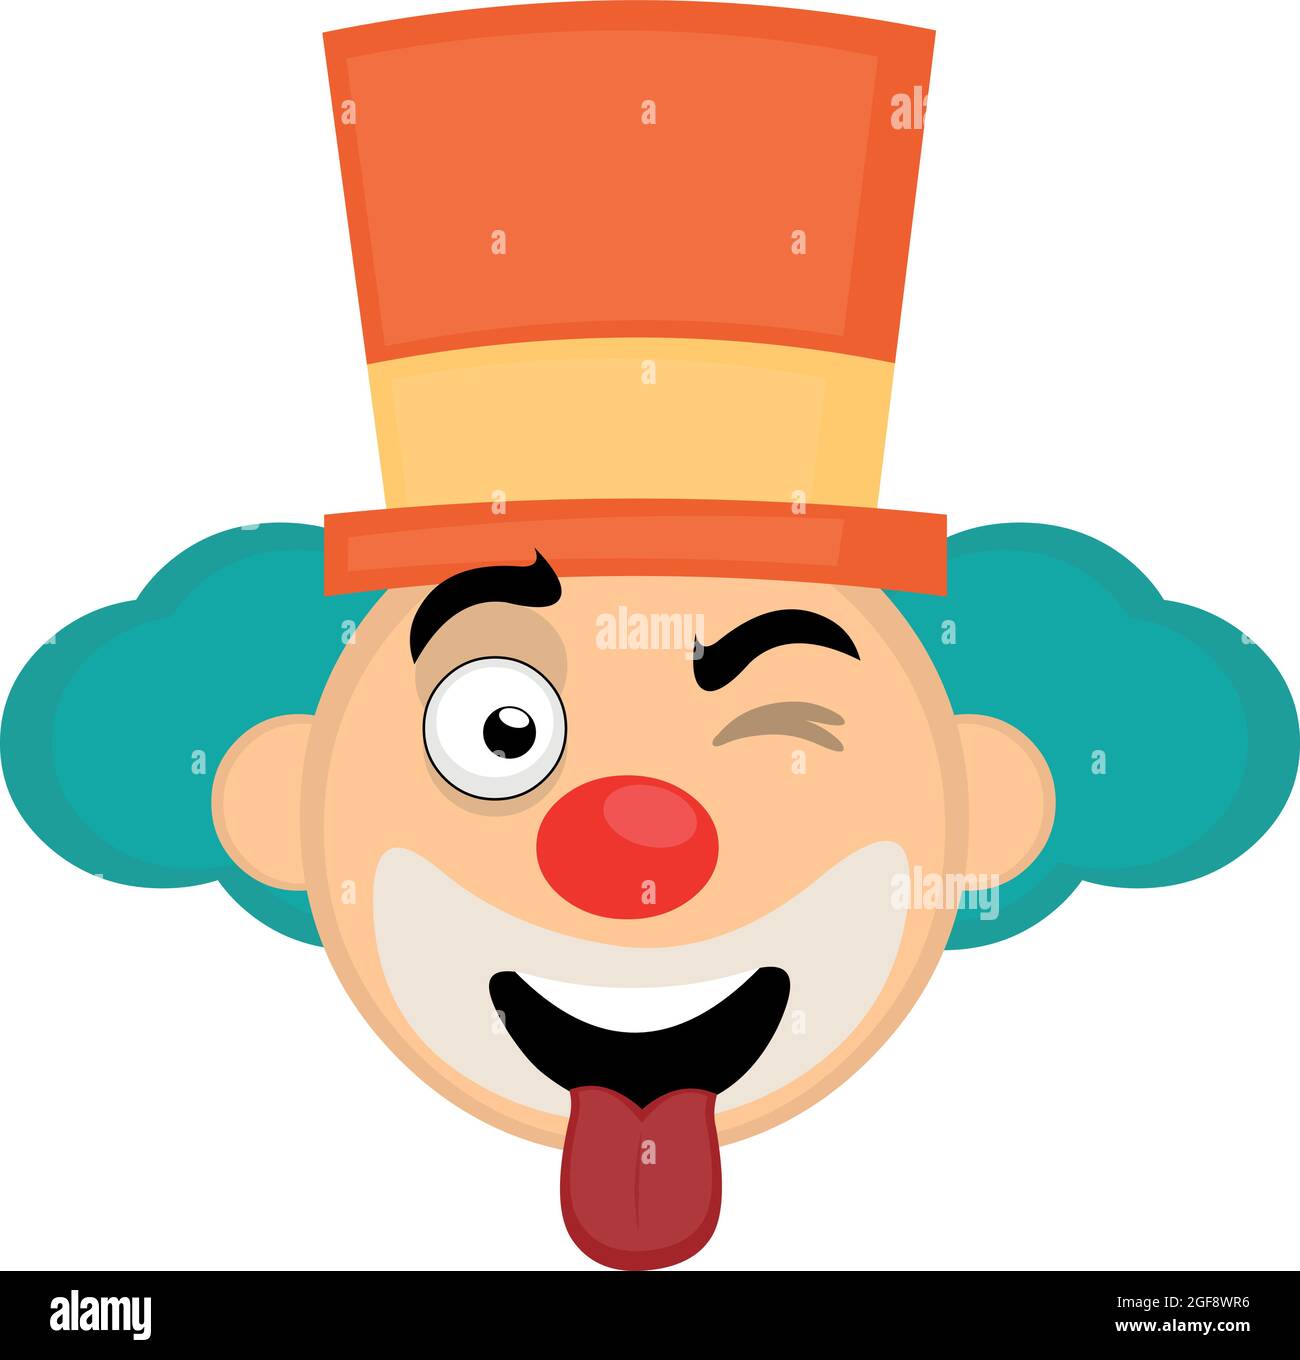 Vector emoticon illustration of the face of a cartoon clown with a hat, winking and with his tongue out Stock Vector